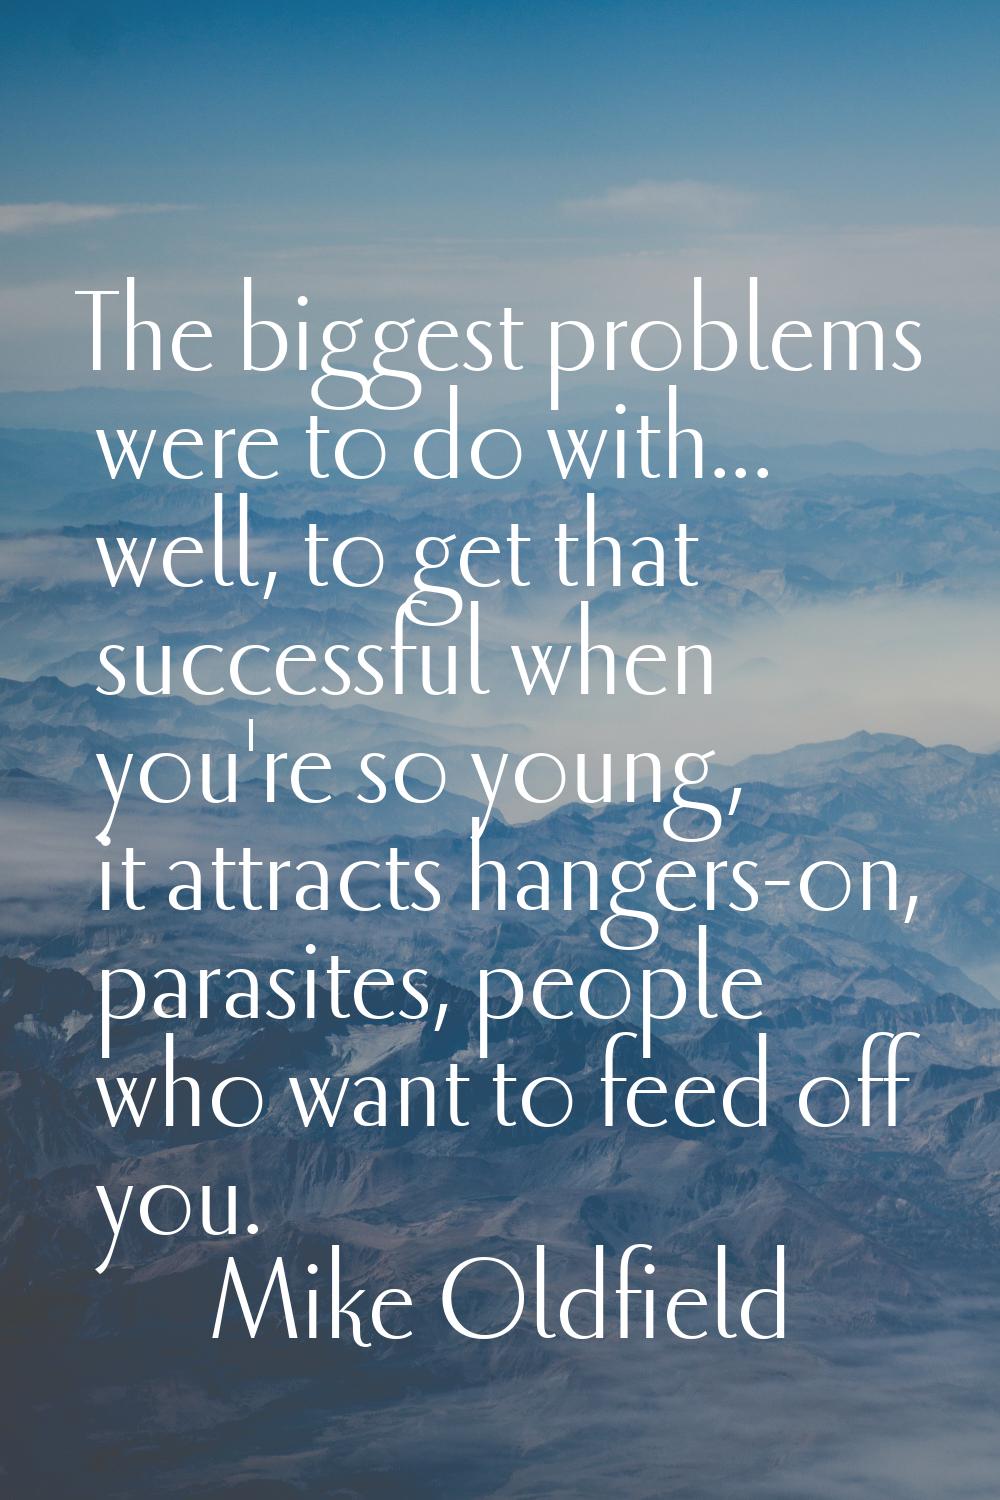 The biggest problems were to do with... well, to get that successful when you're so young, it attra